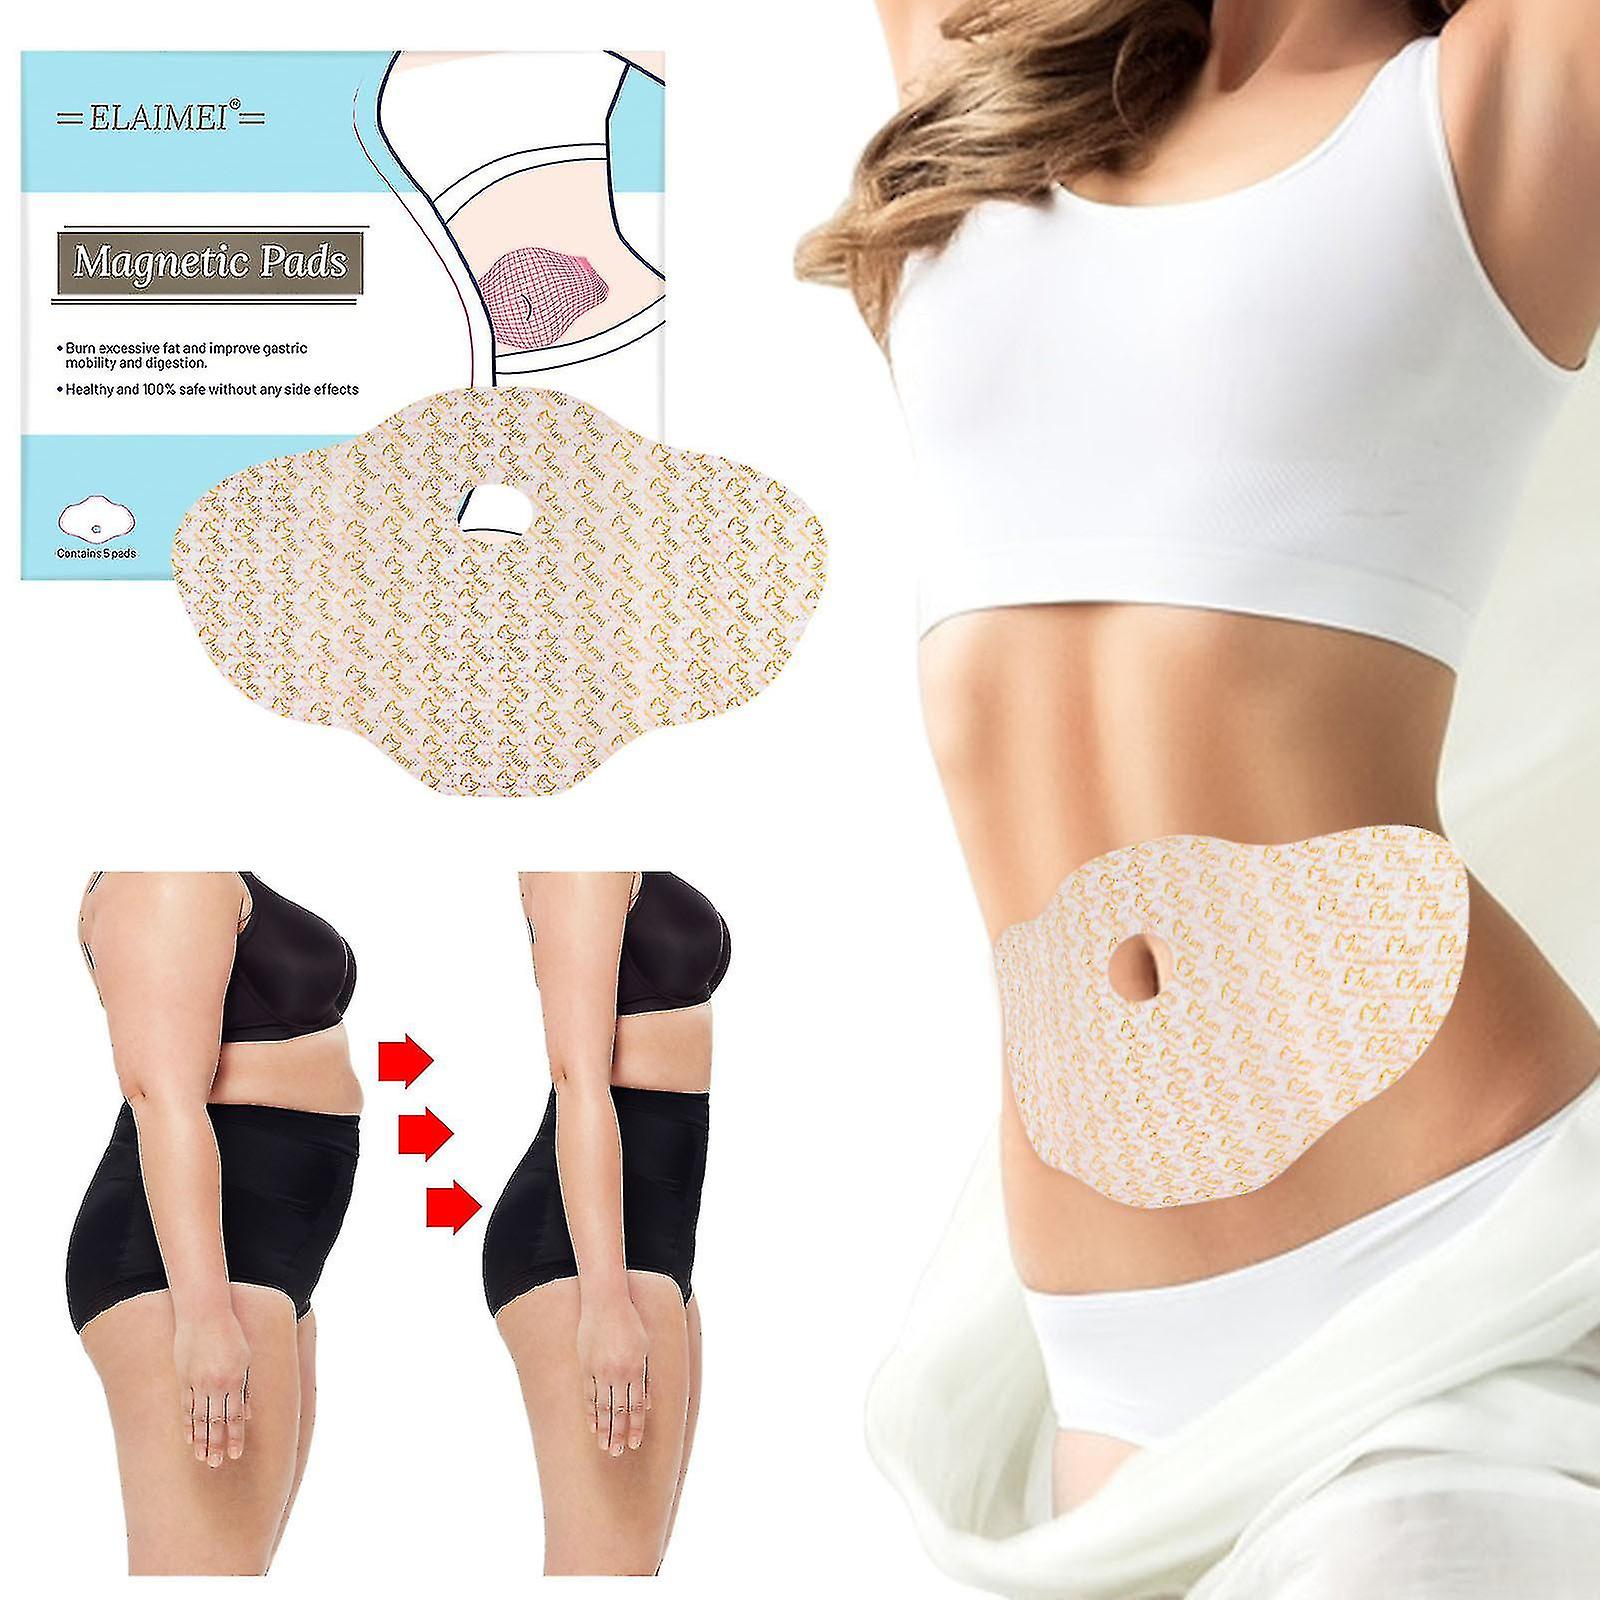 Elaimei Large Fever Lazy Weight Loss Belly Patch 5pcs | Walmart Canada